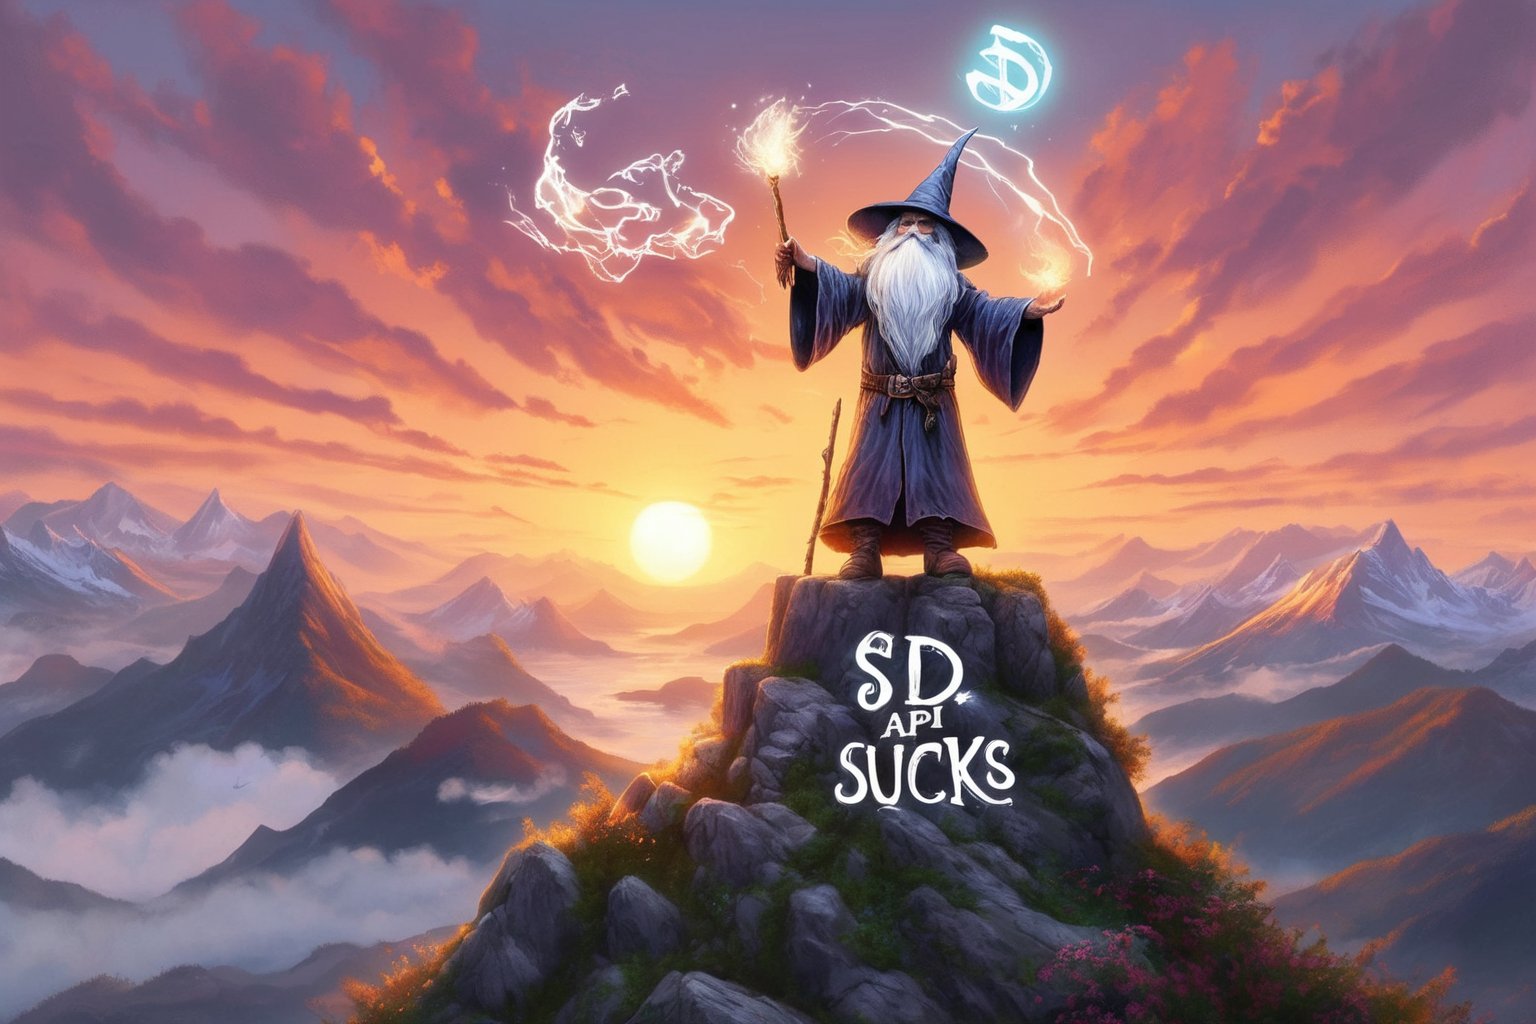 Awesome artwork of a wizard on the top of a mountain at sunrise, with the magic text: "SD3 API. SUCKS"